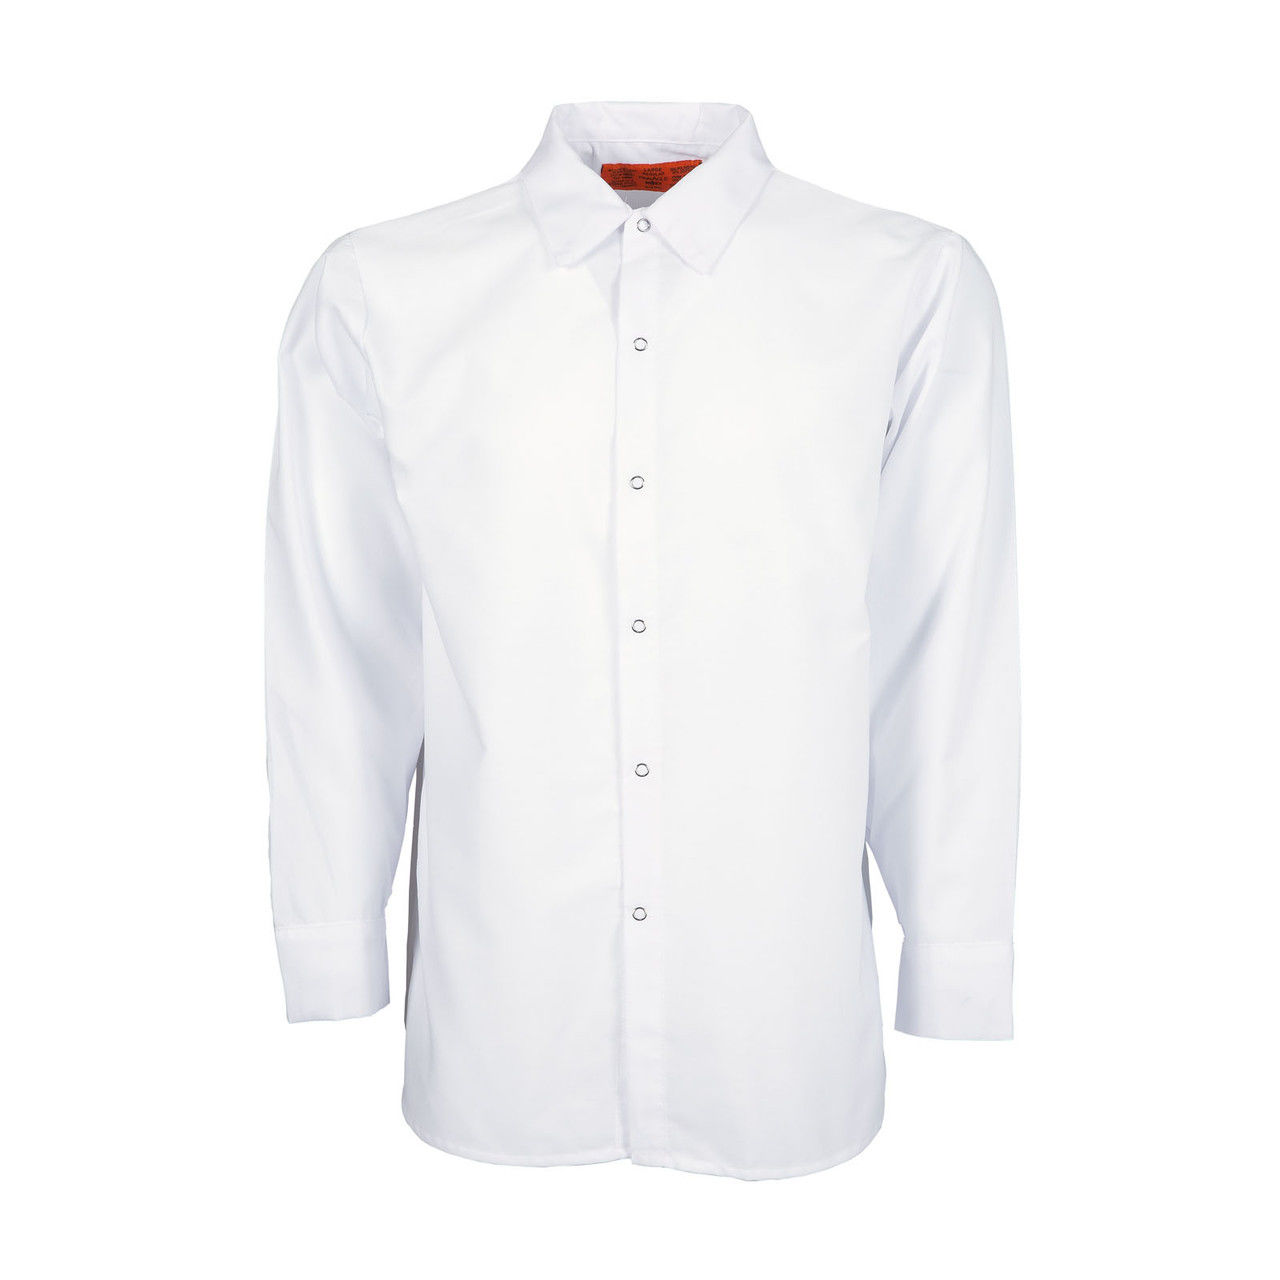 Does the white work shirts mens have a specific type of closure?